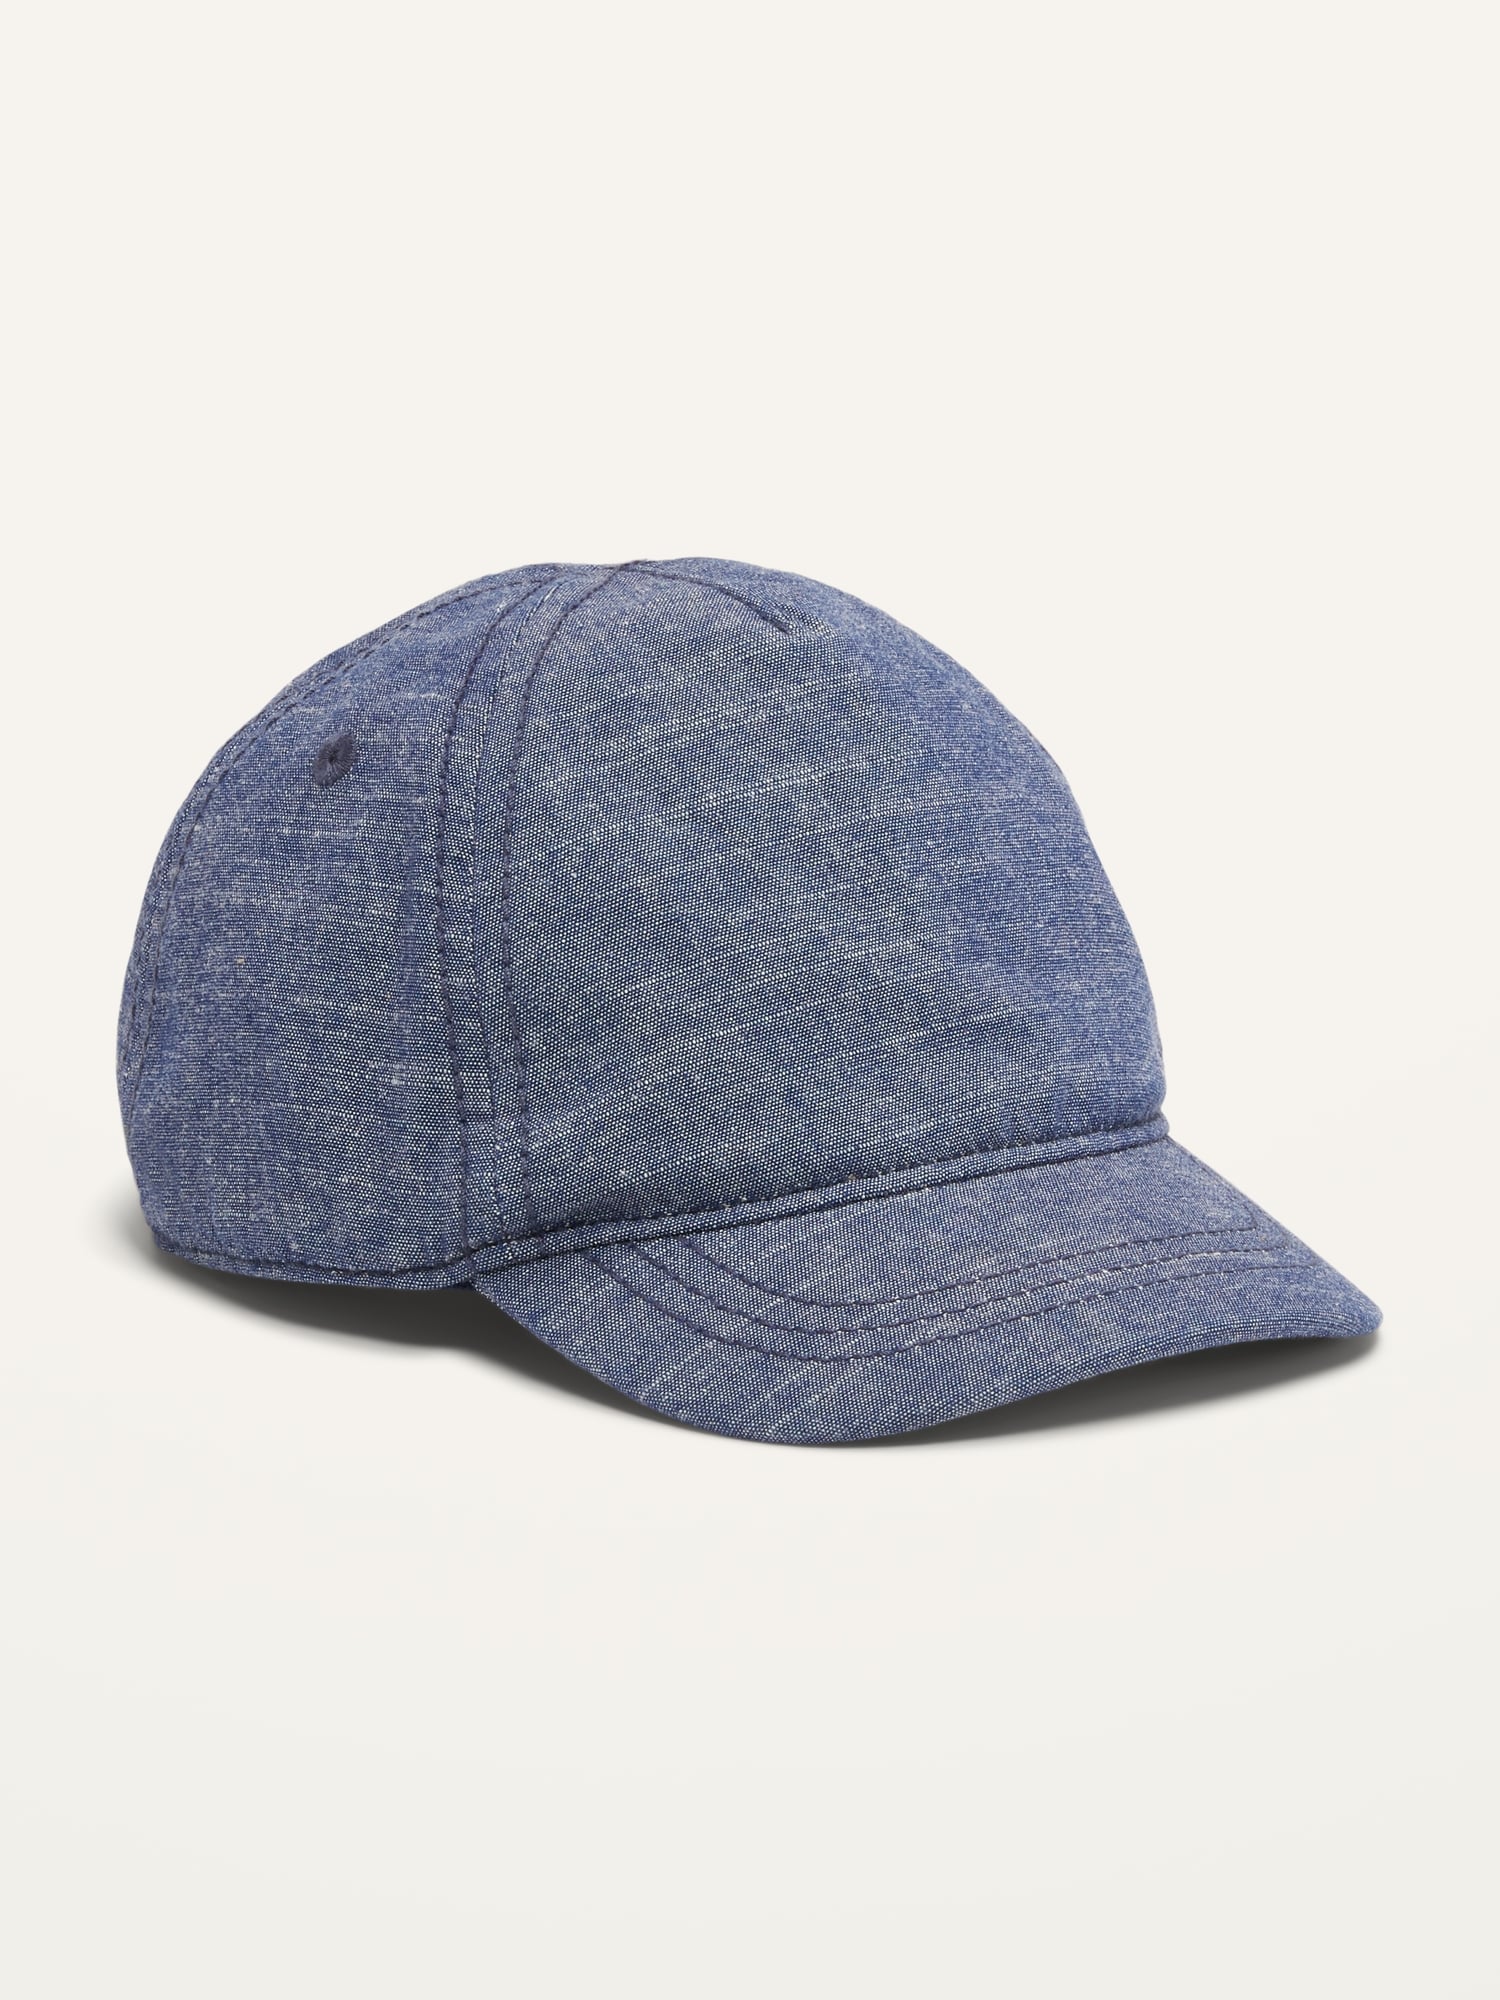 Unisex Chambray Baseball Cap for Baby | Old Navy